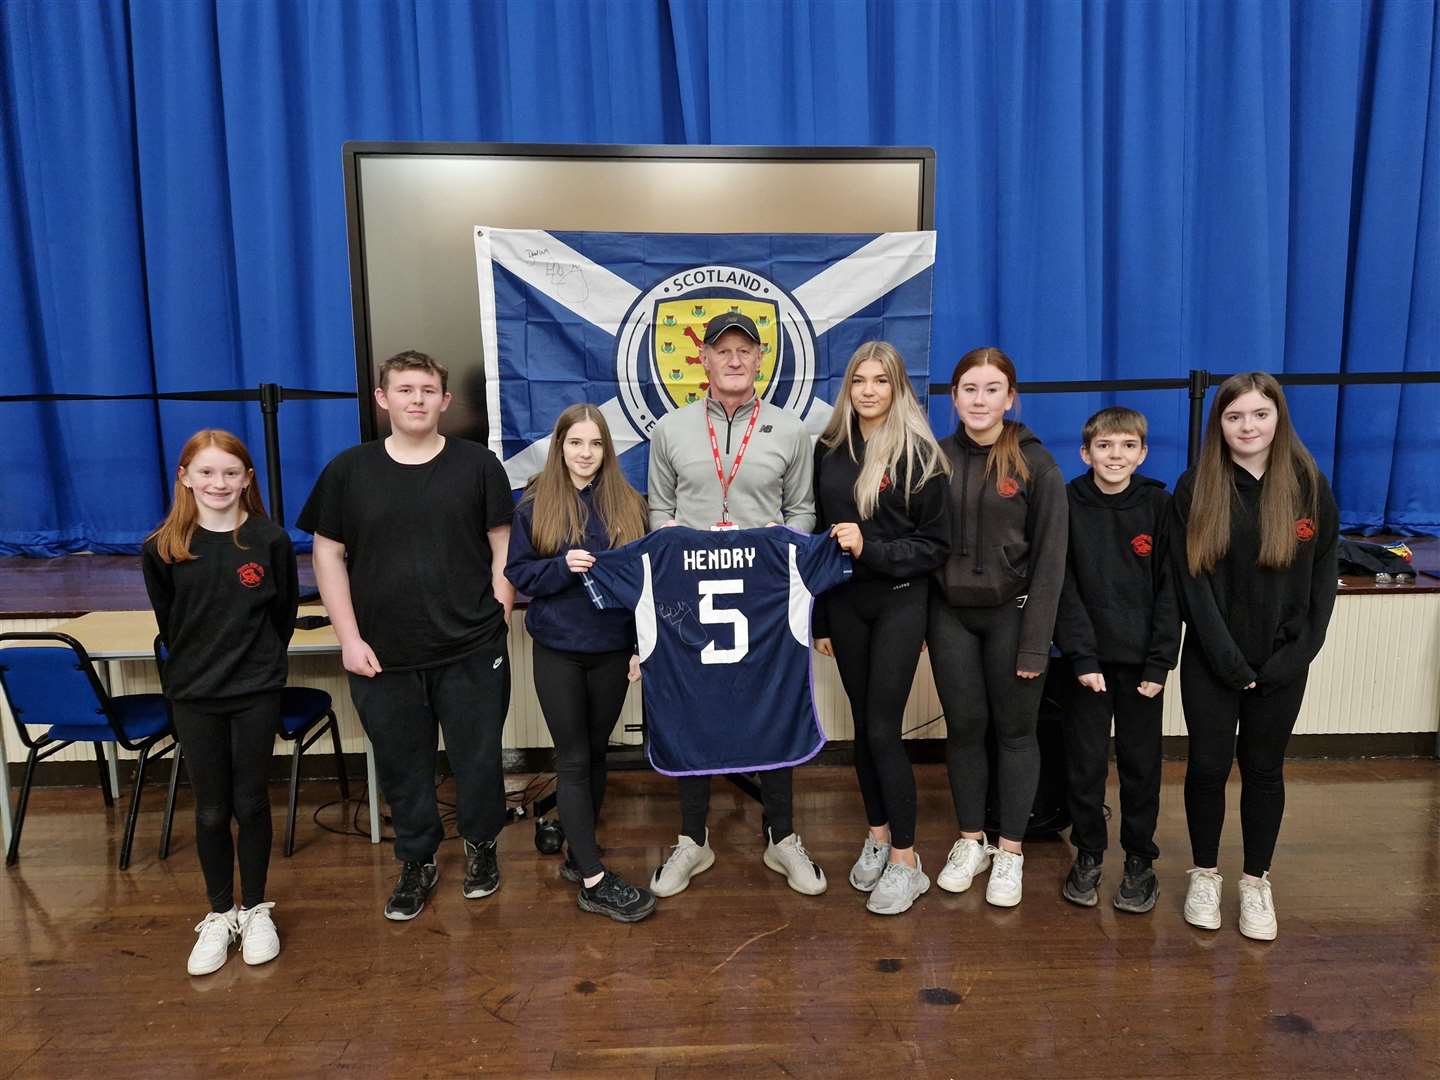 Colin Hendry (centre) with (from left) High Life Highland's active schools young leaders Ava Steven, Liam Mackinnon, Nyah McAdie, Keira Gunn, Ami Alexander, Connor Gunn and Cadie Cannop.